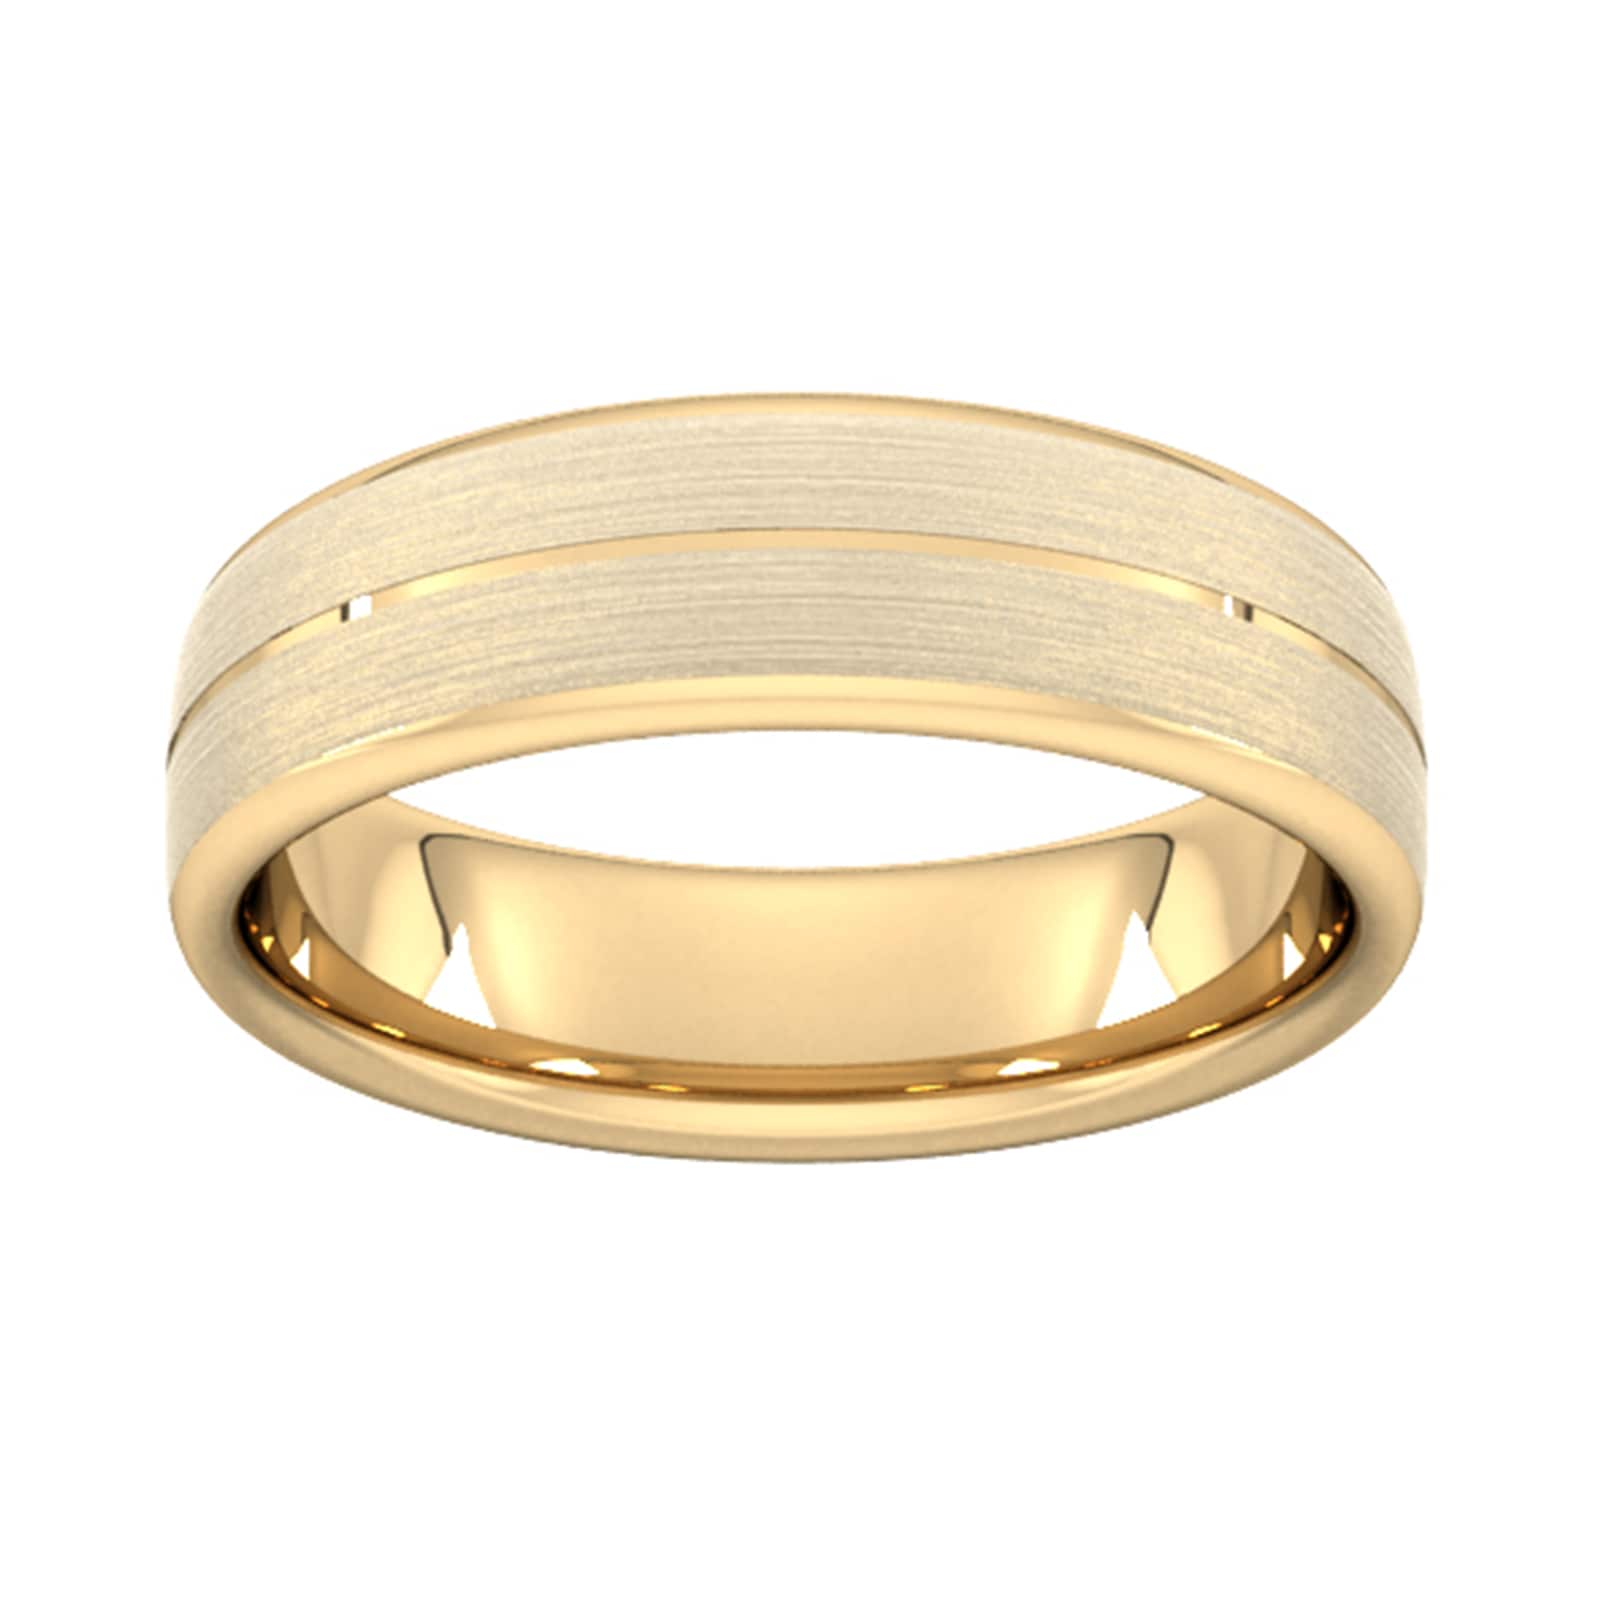 6mm Slight Court Extra Heavy Centre Groove With Chamfered Edge Wedding Ring In 18 Carat Yellow Gold - Ring Size N